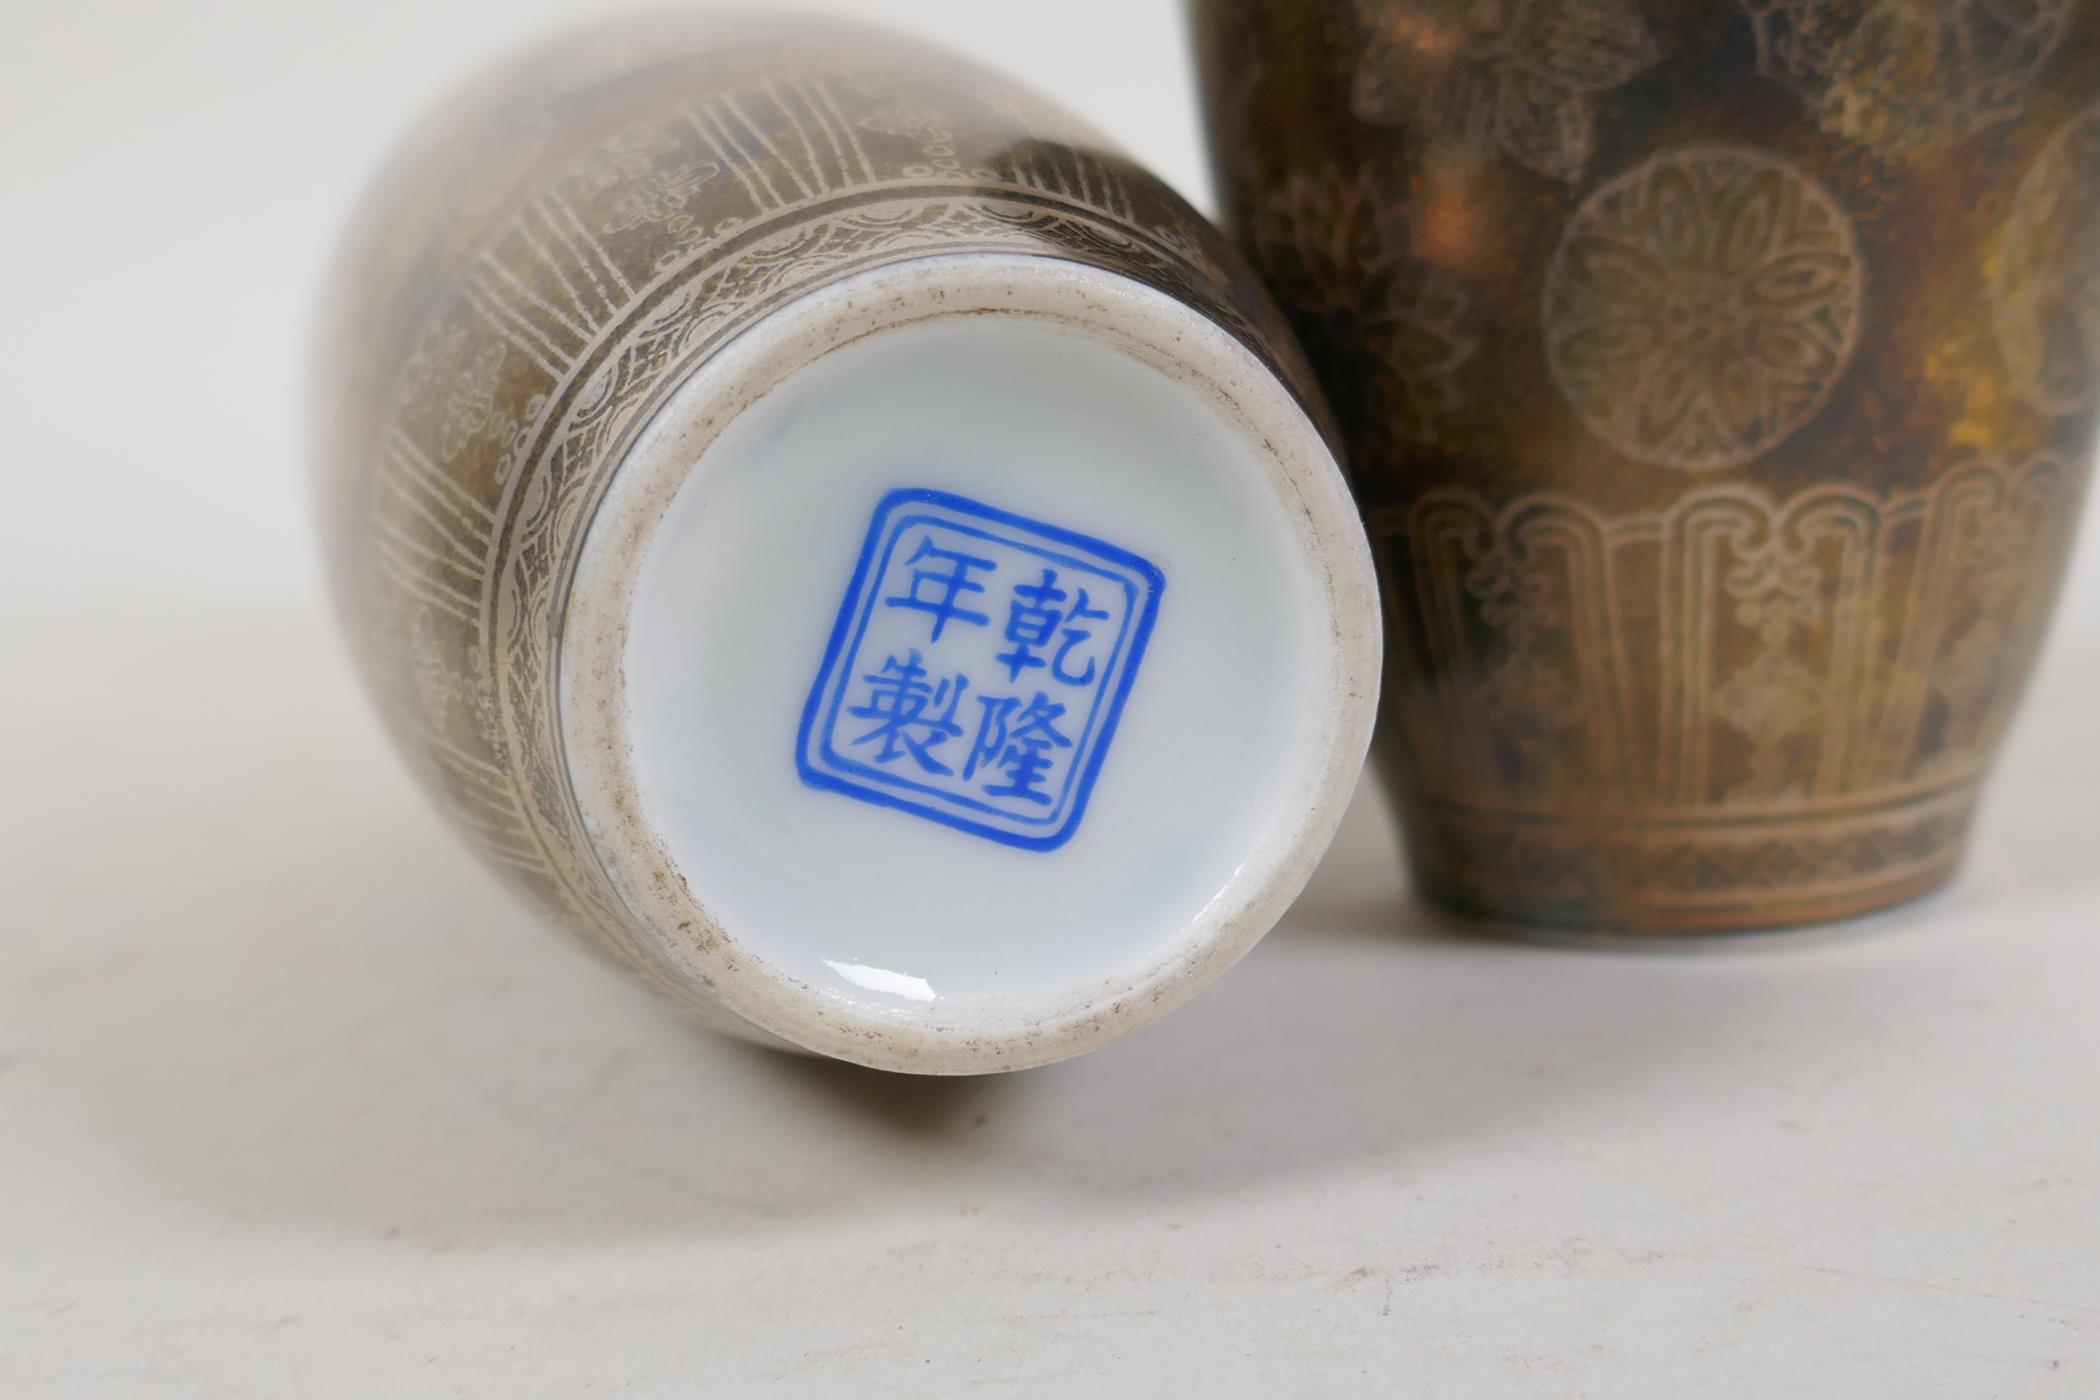 A pair of lustre glazed porcelain vases with floral and character decoration, Chinese 4 character - Image 4 of 4